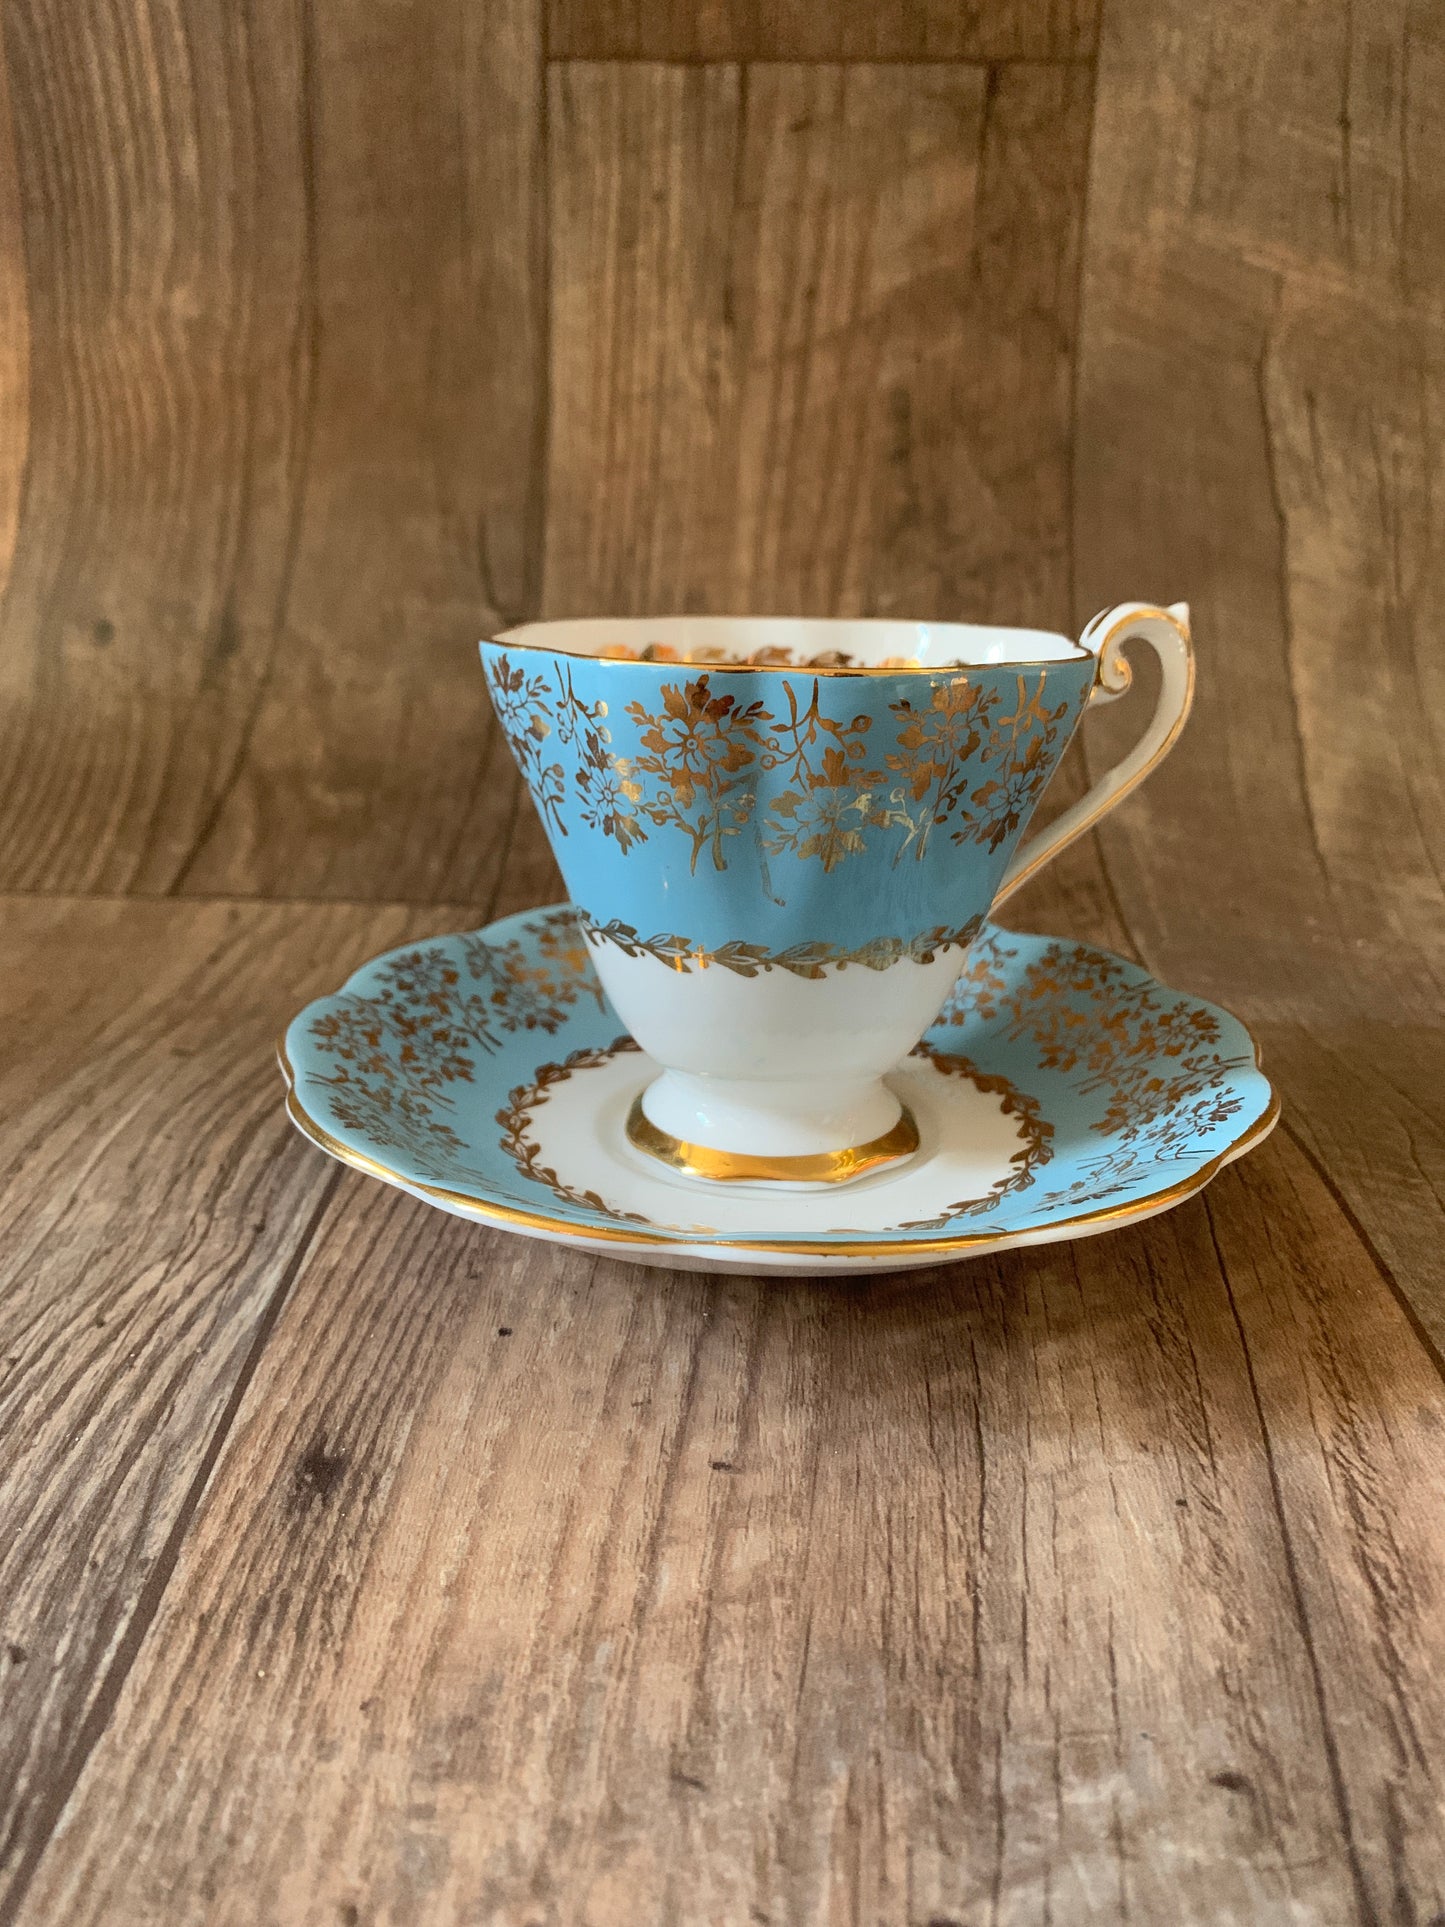 Blue and Gold Vintage Tea Cup and Saucer Royal Standard Teacup